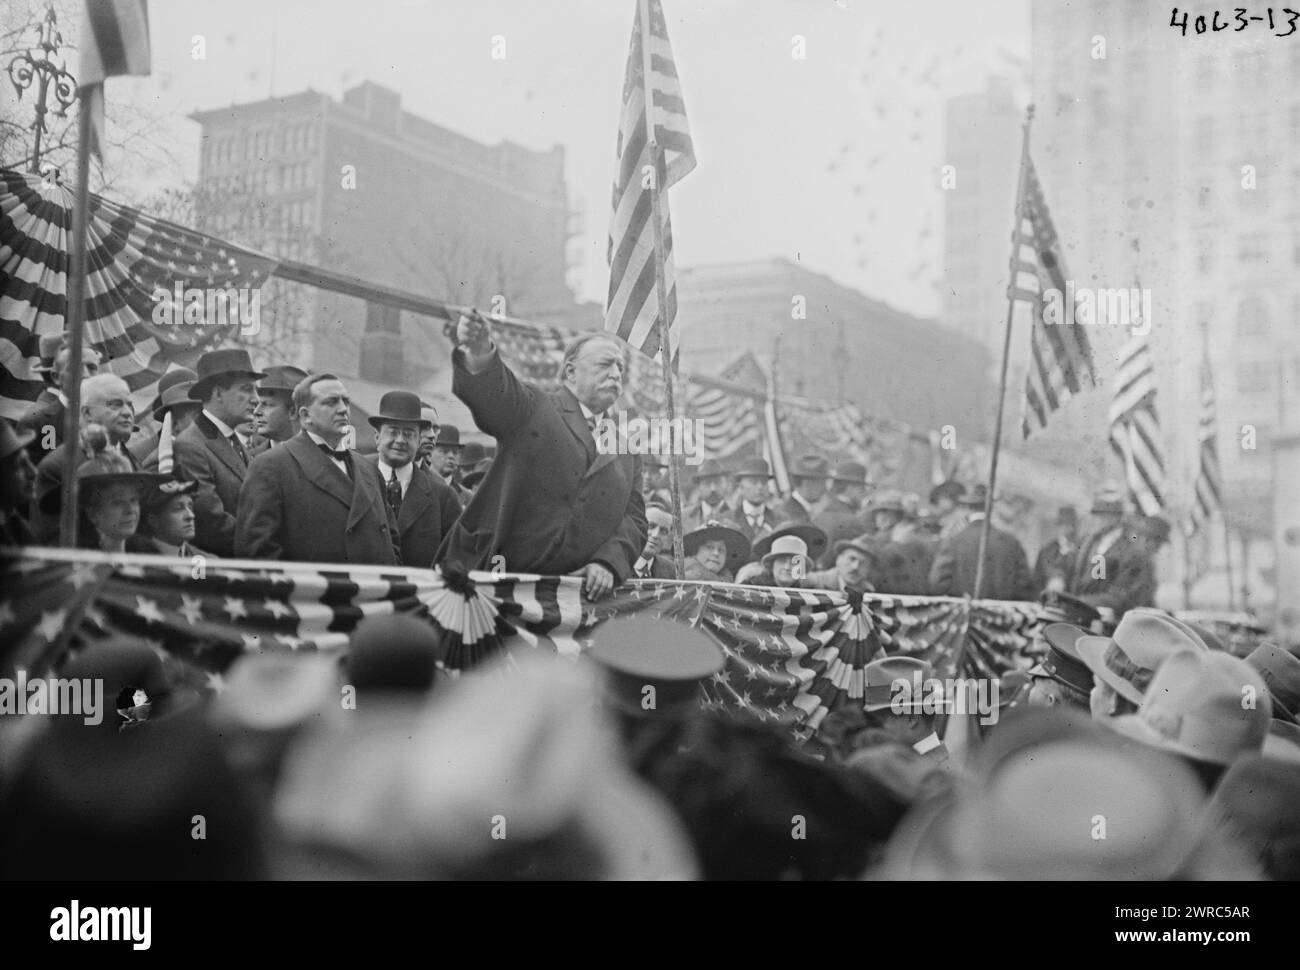 W.H. Taft, Photograph shows former president William Howard Taft campaigning for Republican candidate Charles Evans Hughes on Nov. 4, 1916 in Union Square, New York City., 1916 Nov. 4, Glass negatives, 1 negative: glass Stock Photo